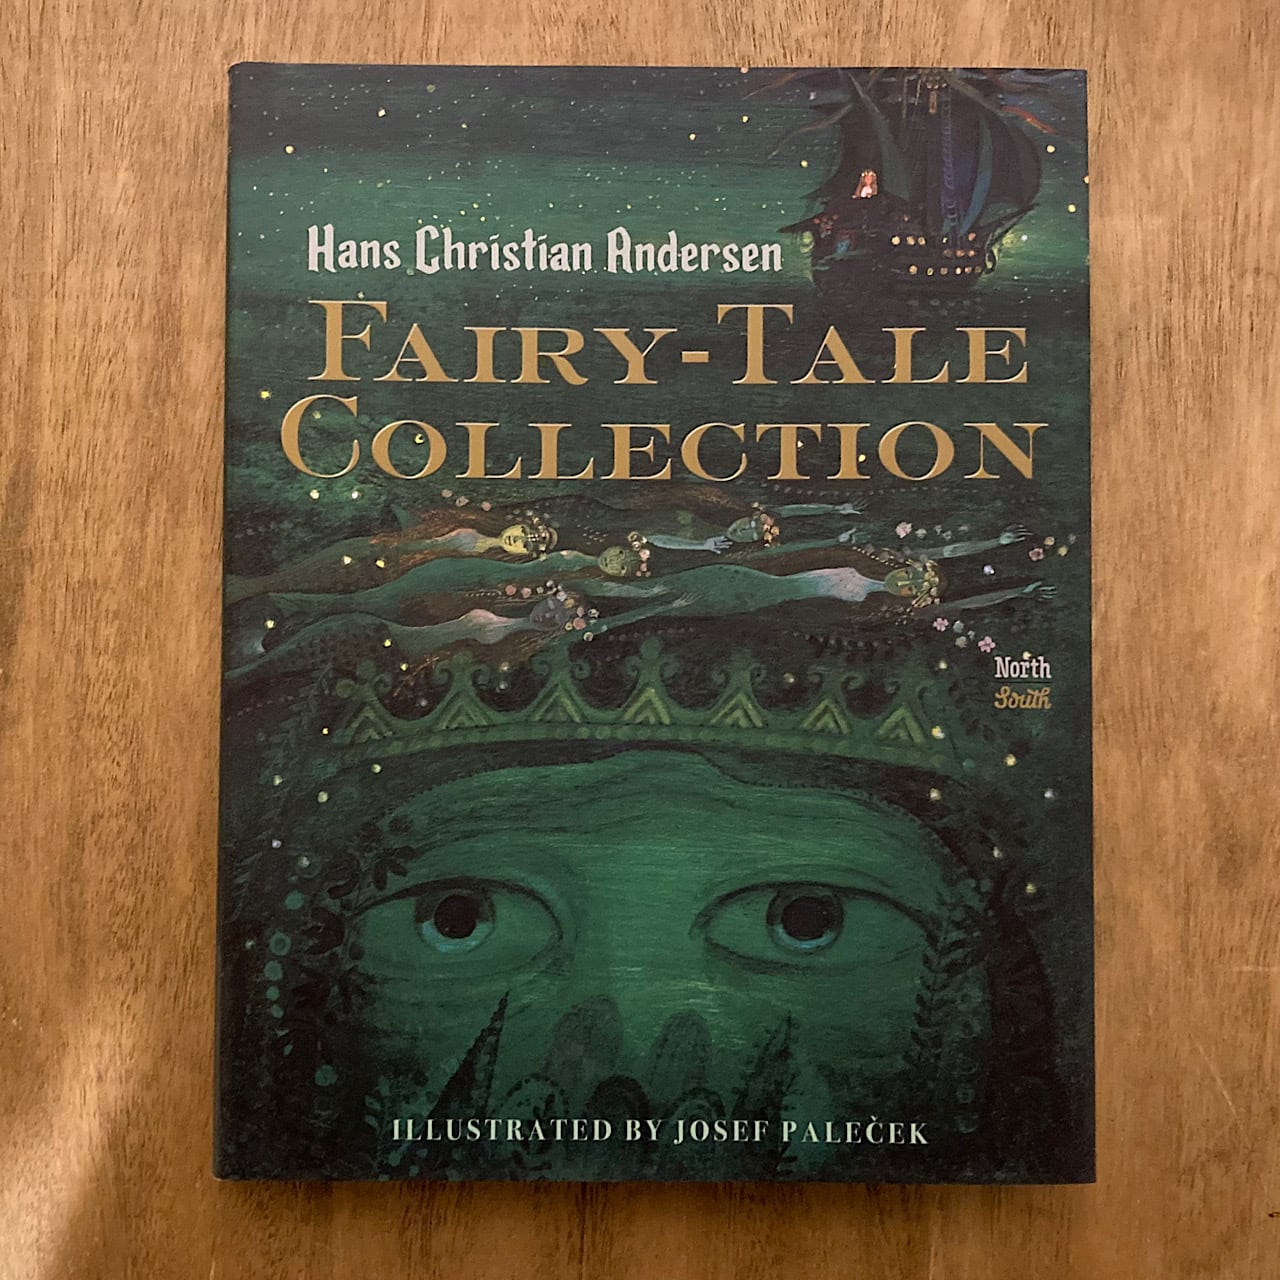 Hans Christian Andersen Fairy Tale Collection | 素敵な洋書の絵本の 